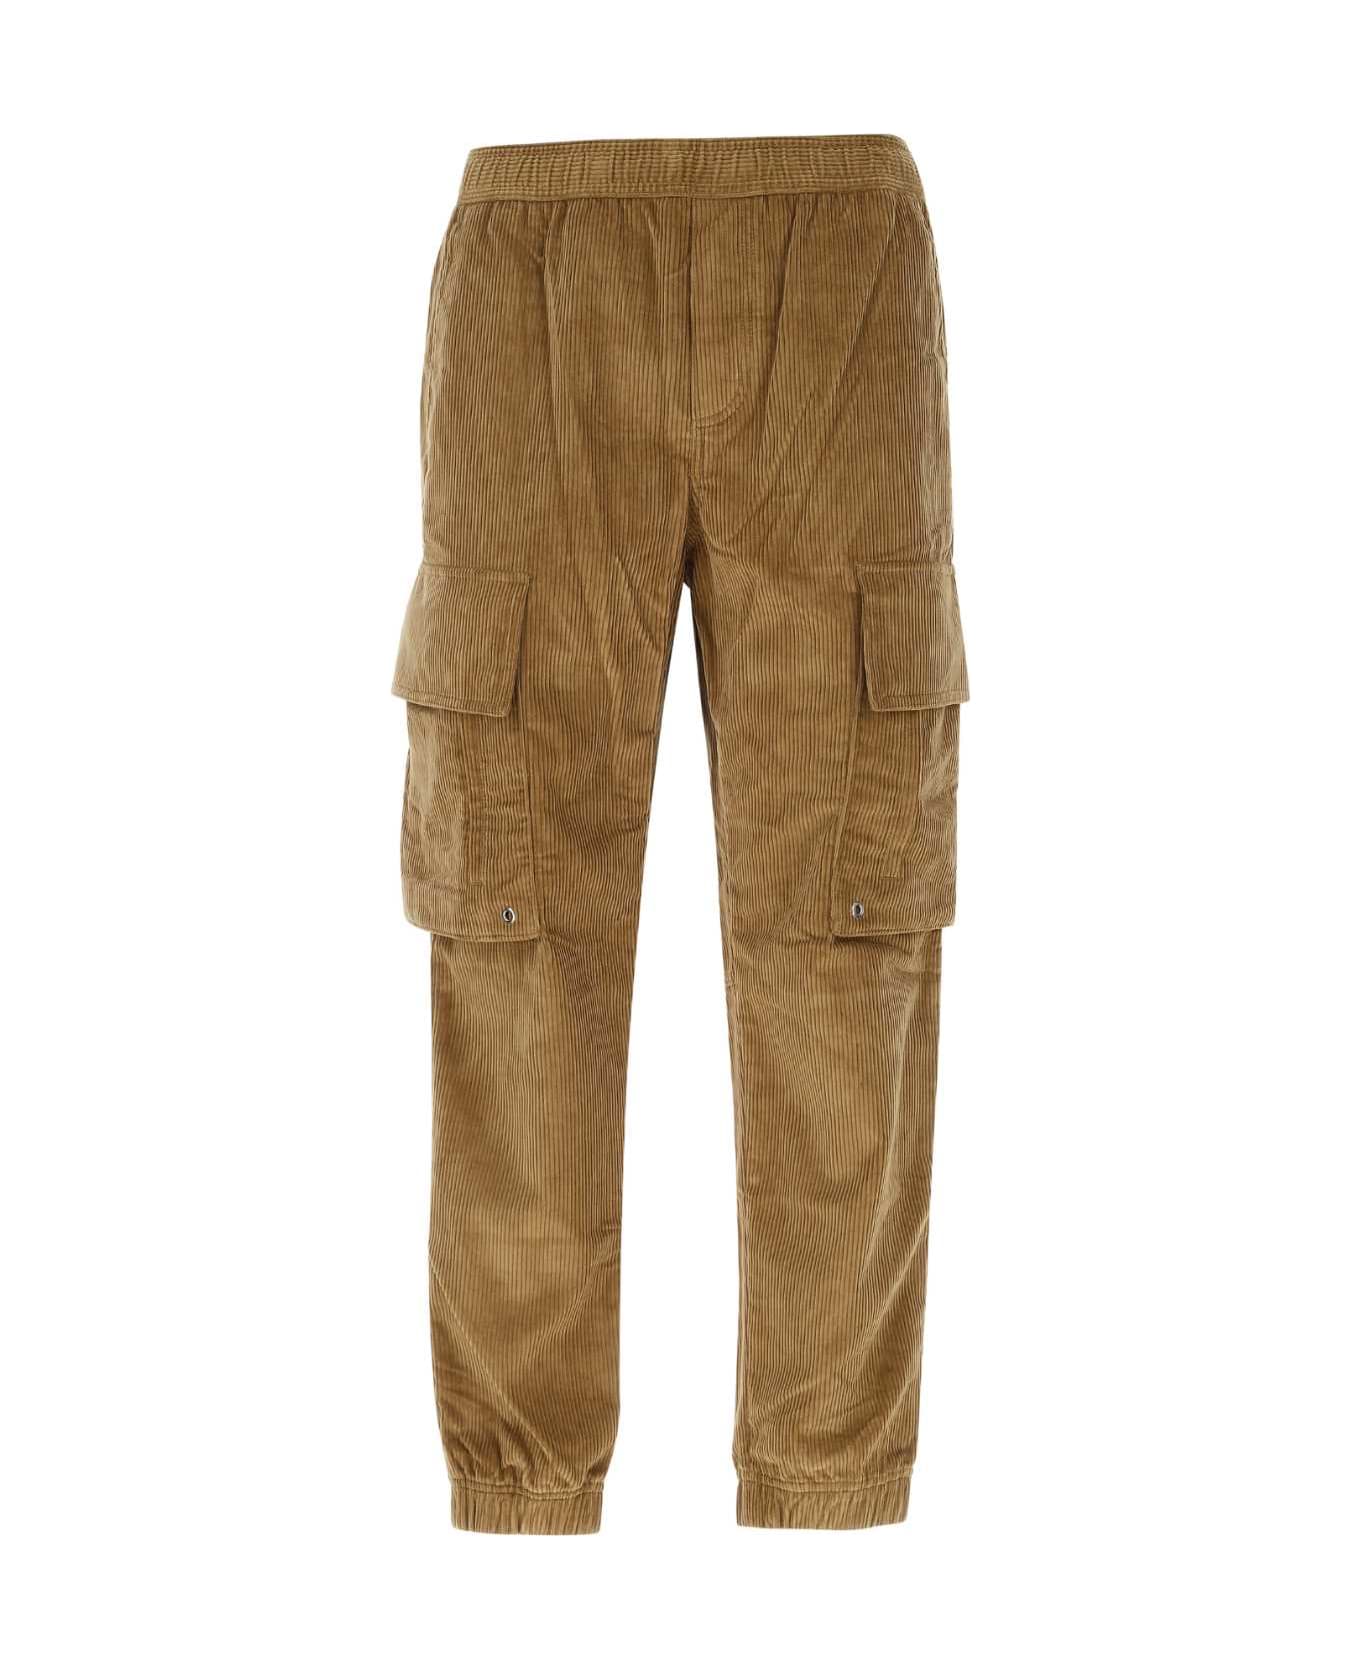 Burberry Biscuit Corduroy Cargo Pant - A1490